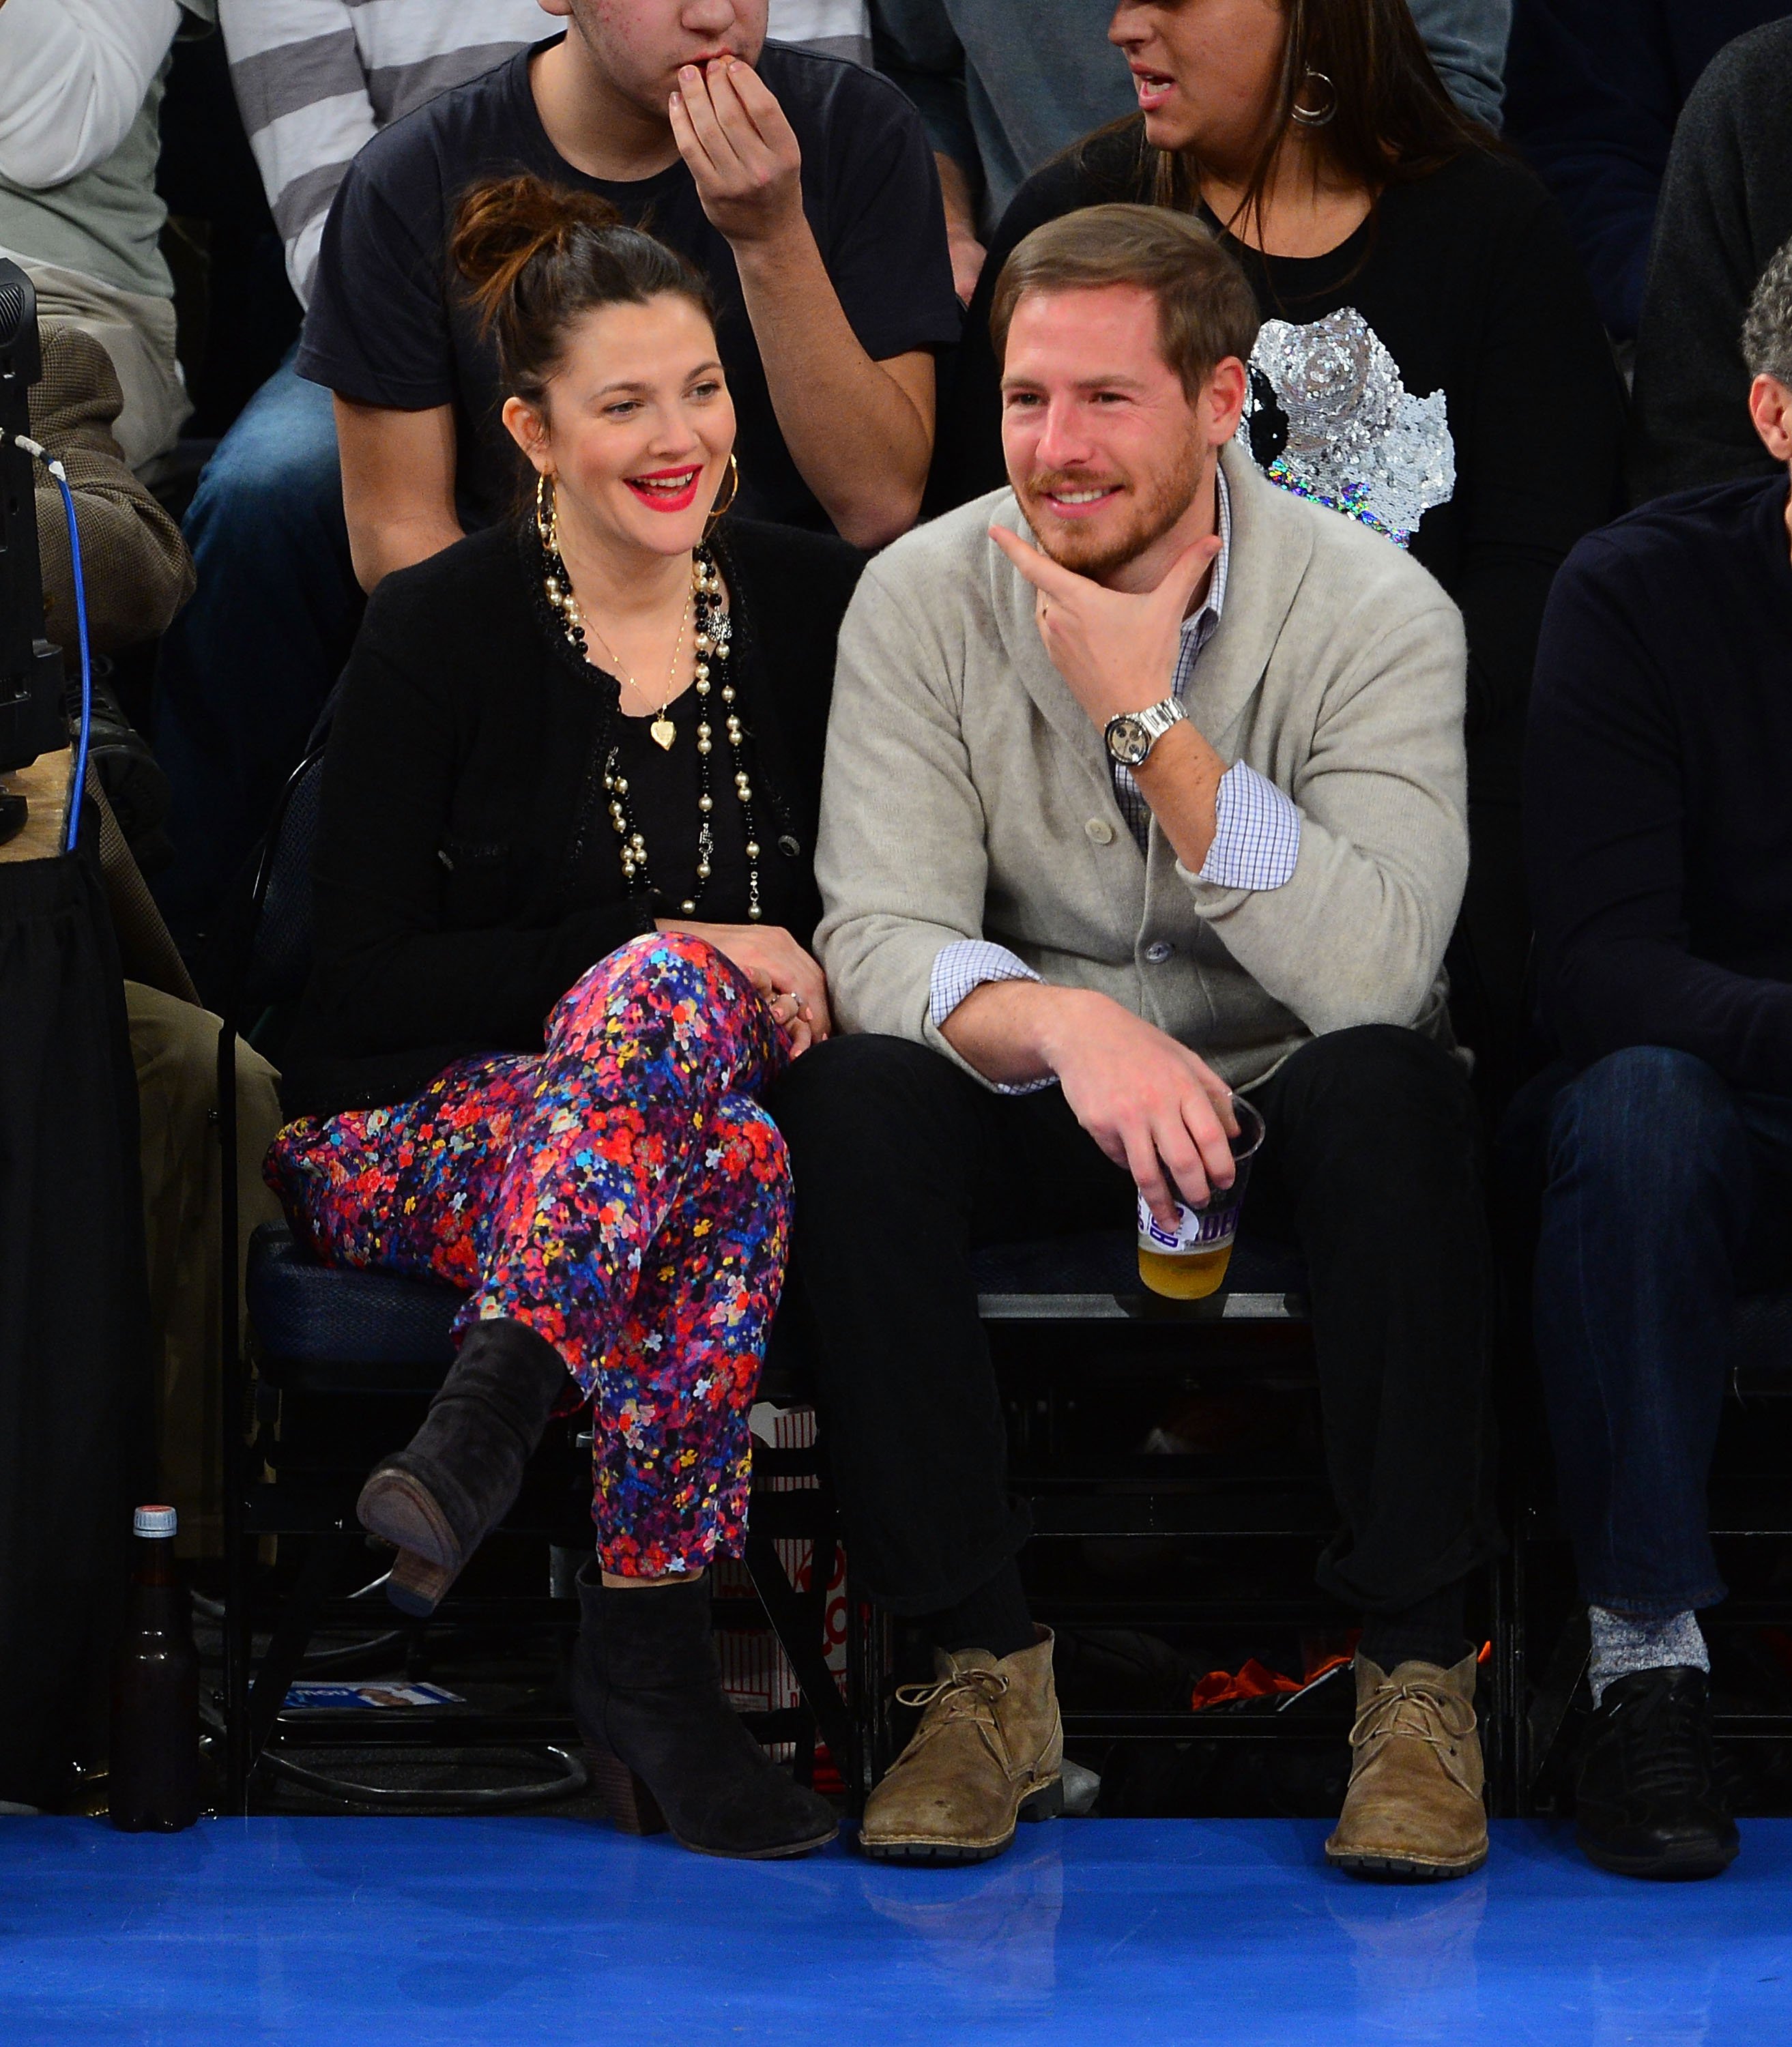 Drew Barrymore and Will Kopelman during the Chicago Bulls vs New York Knicks game at Madison Square Garden on January 11, 2013 in New York City. / Source: Getty Images